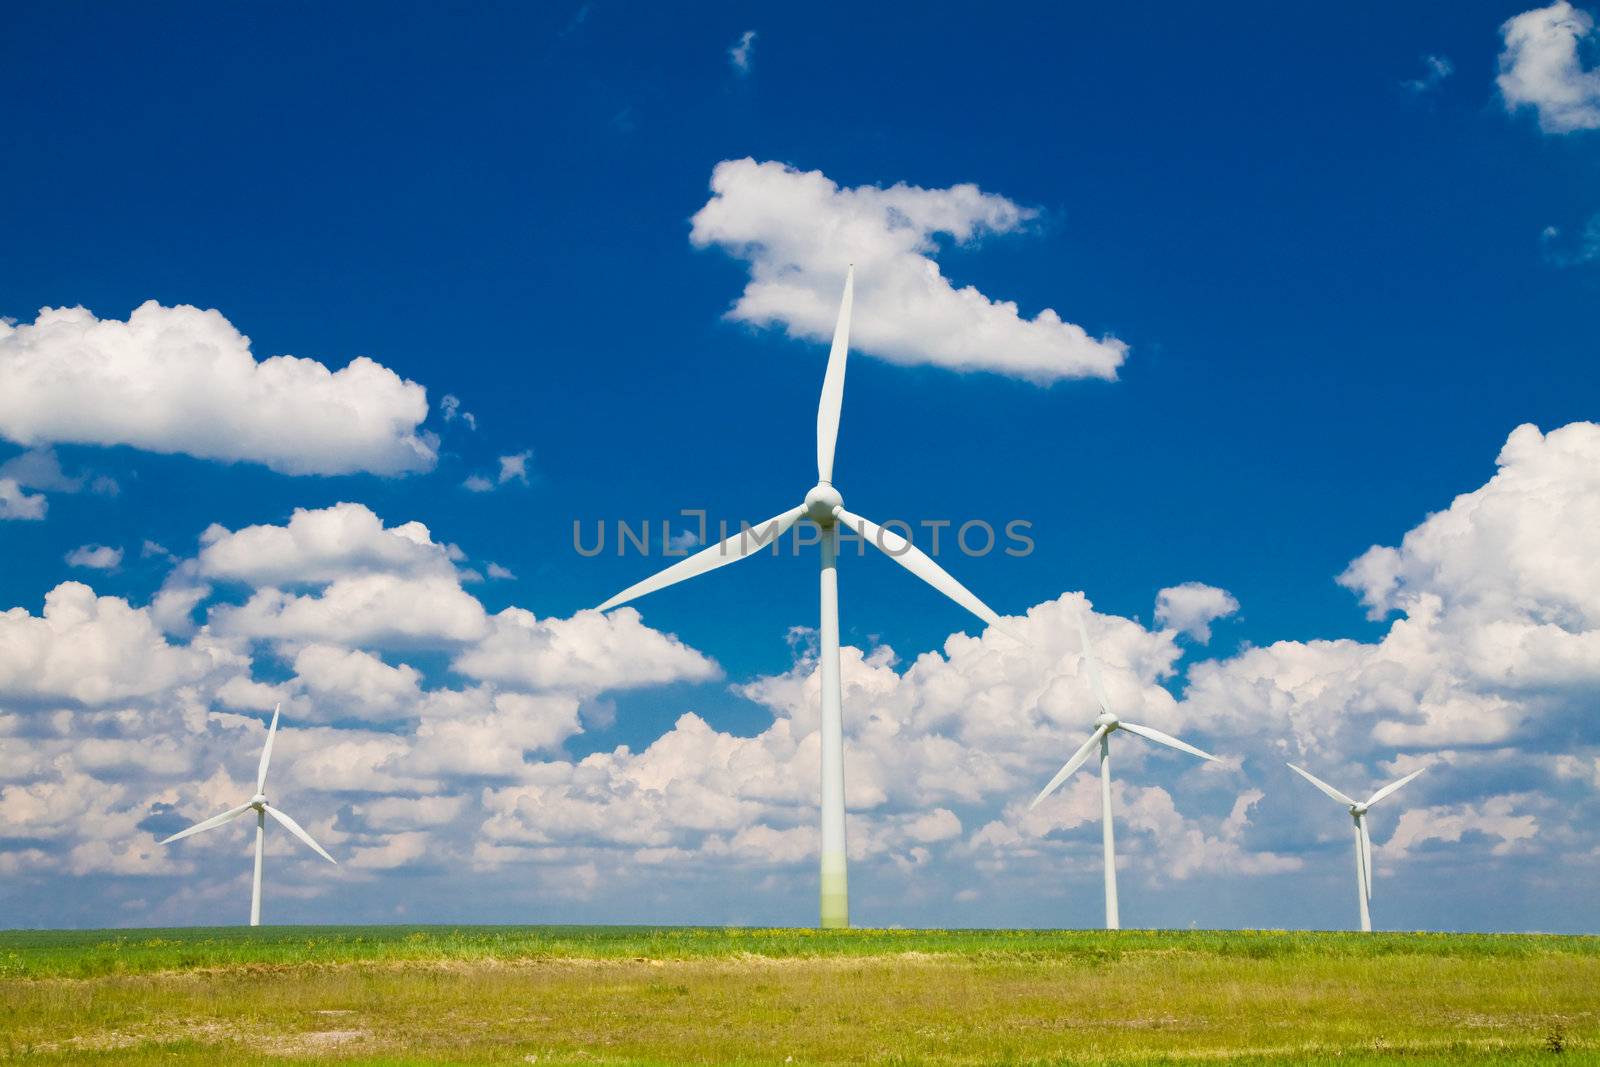 Windmills horizontal in a field, blue sky with clouds